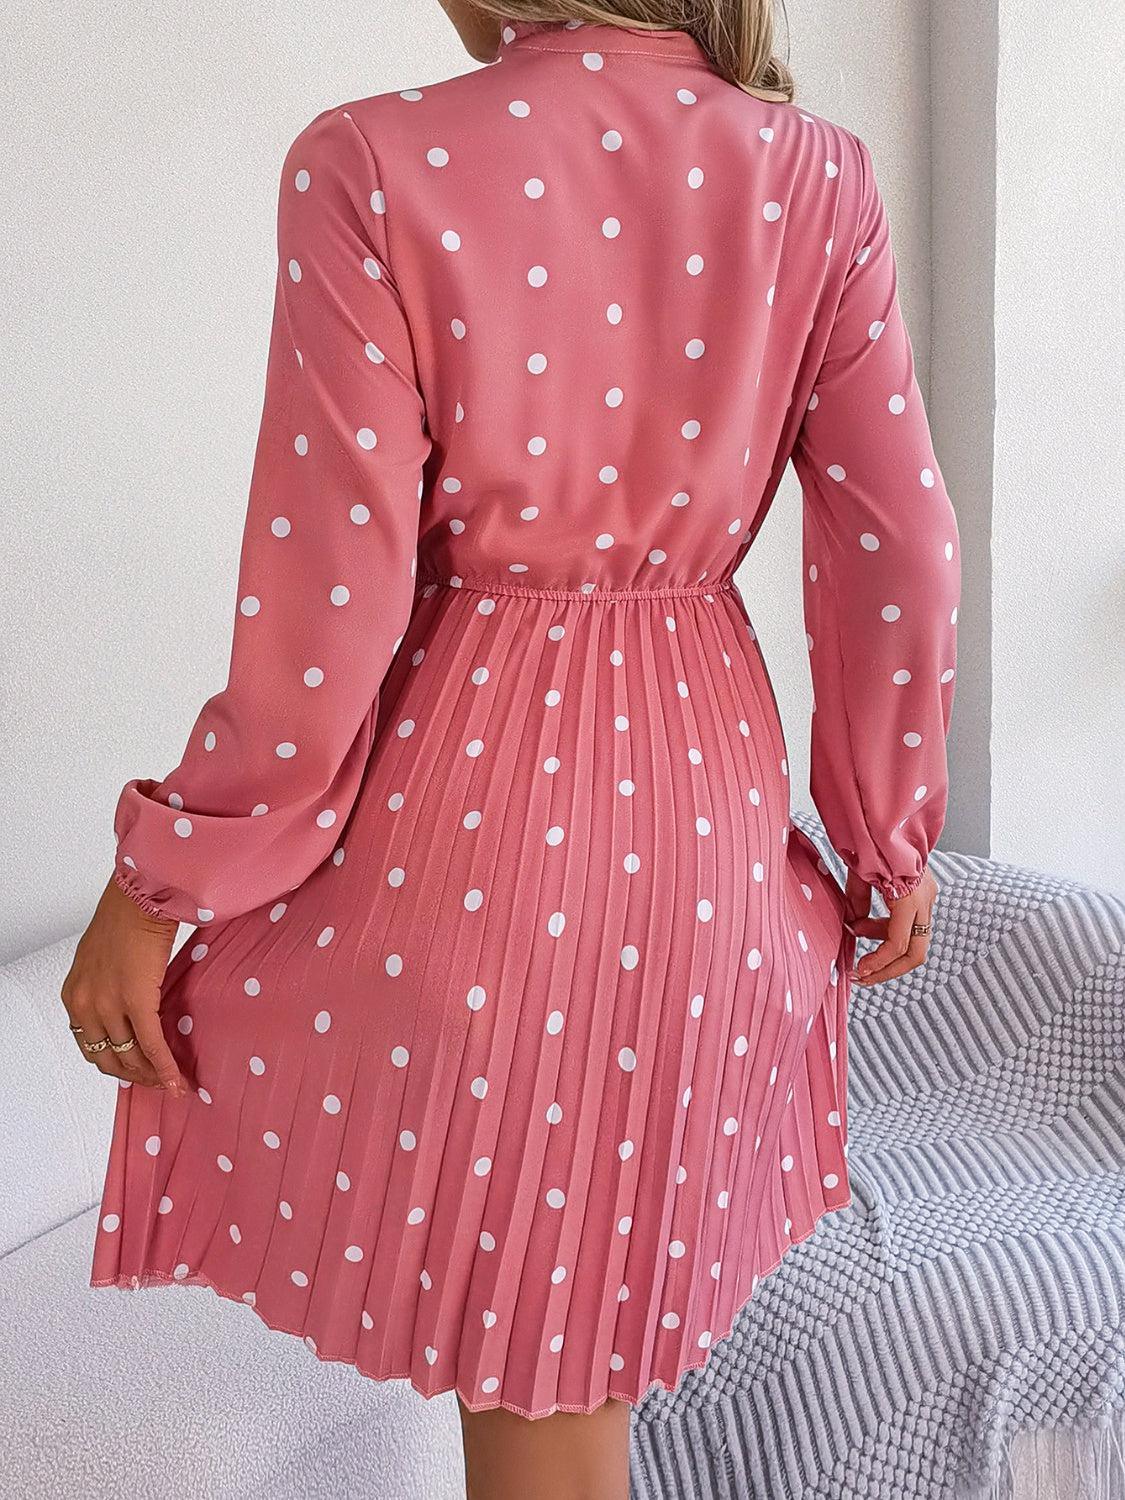 a woman wearing a pink dress with white polka dots